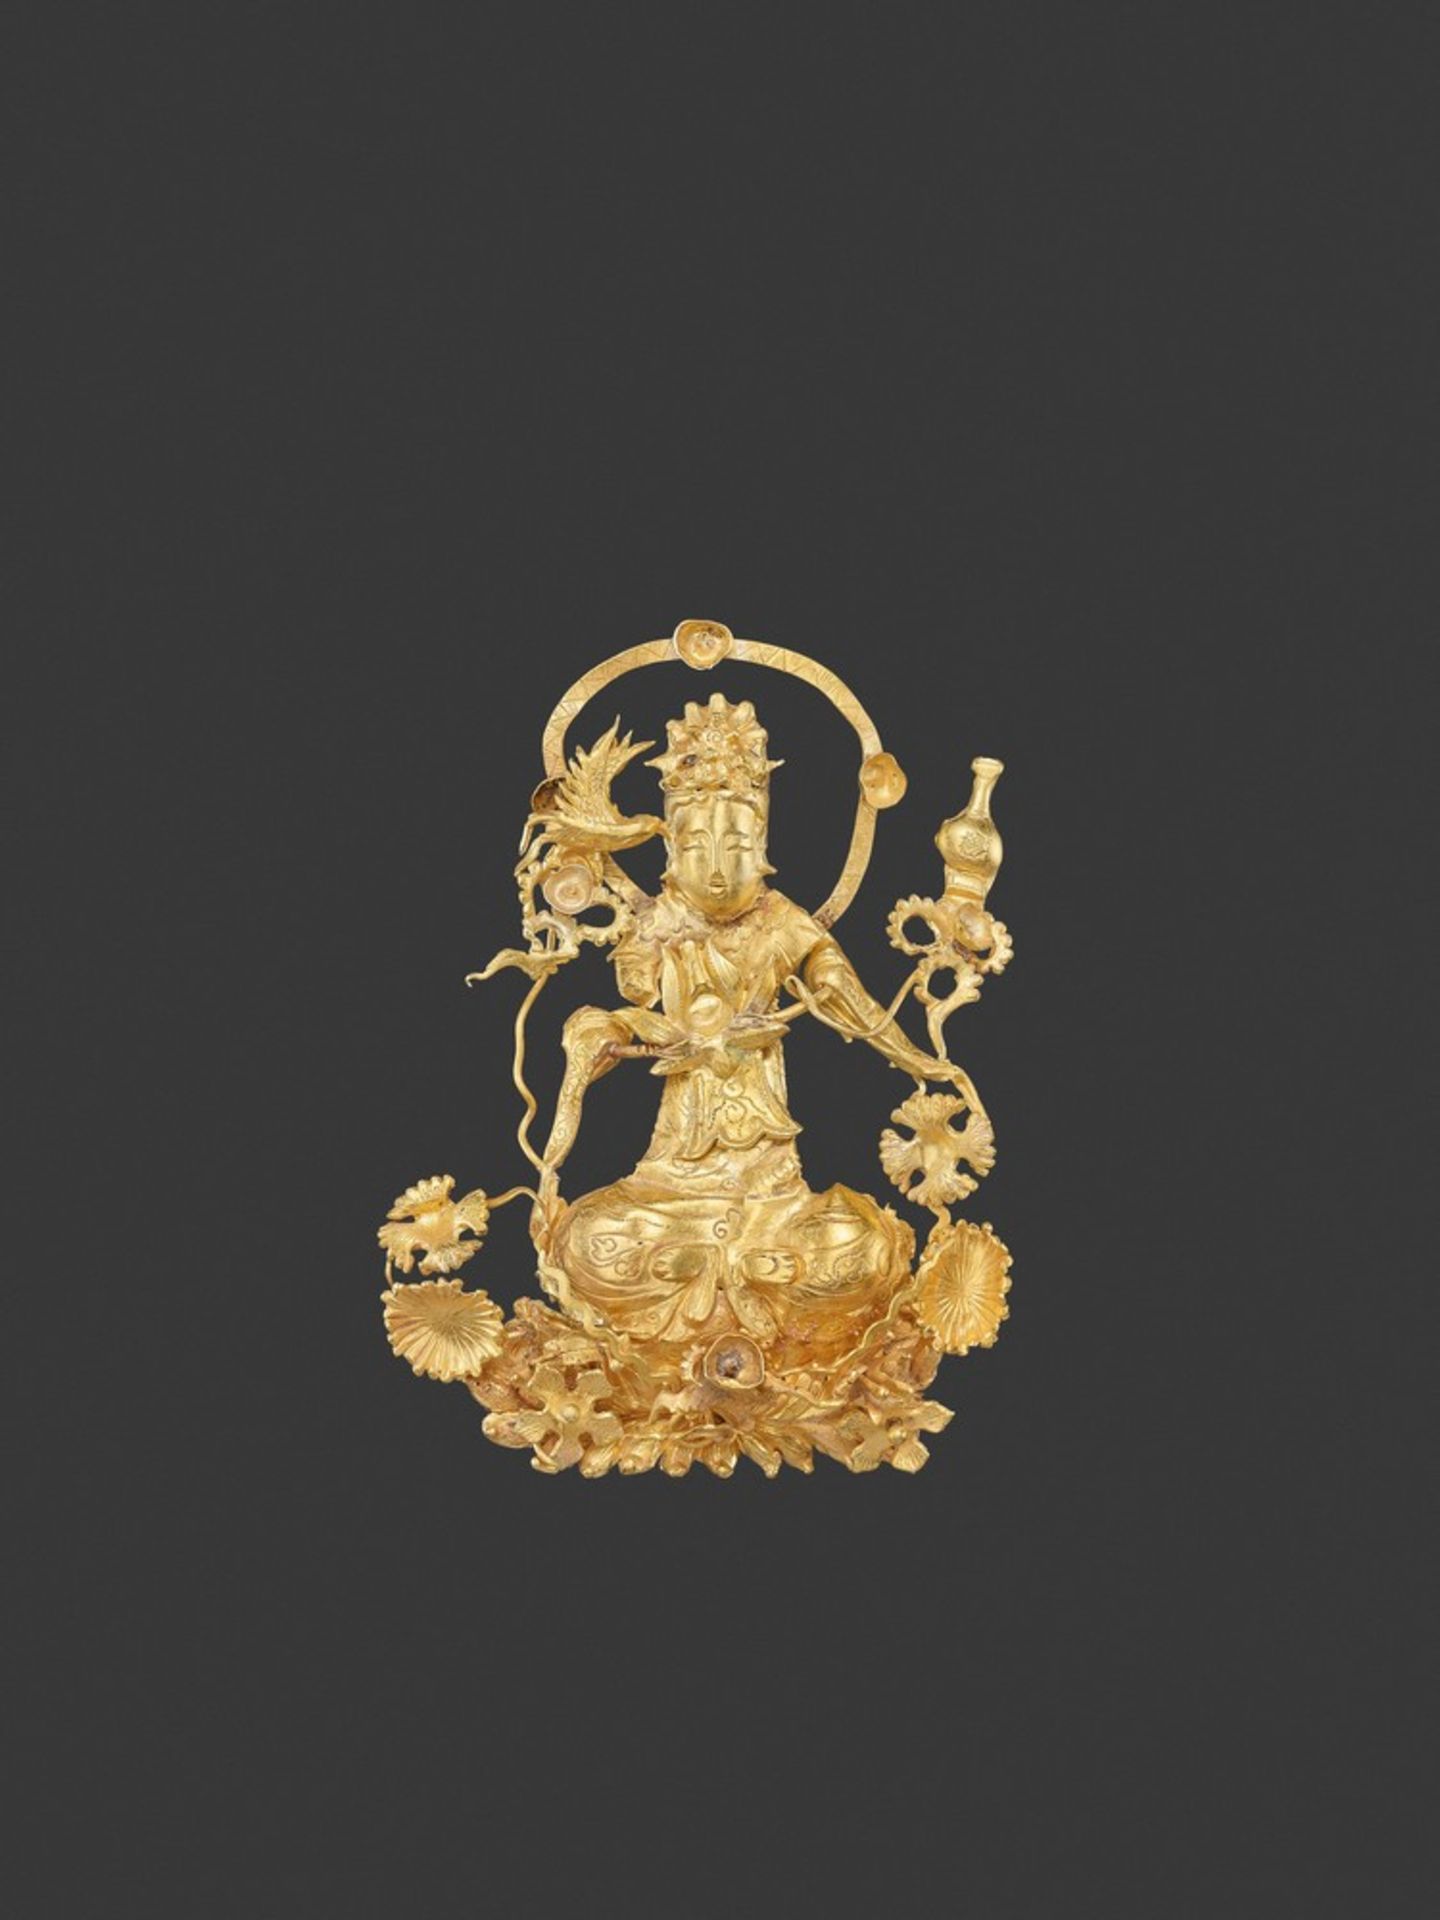 A LIAO DYNASTY GOLD REPOUSSÉ 'GUANYIN' FILIGREE ORNAMENT China, 916-1125. The Goddess of Mercy